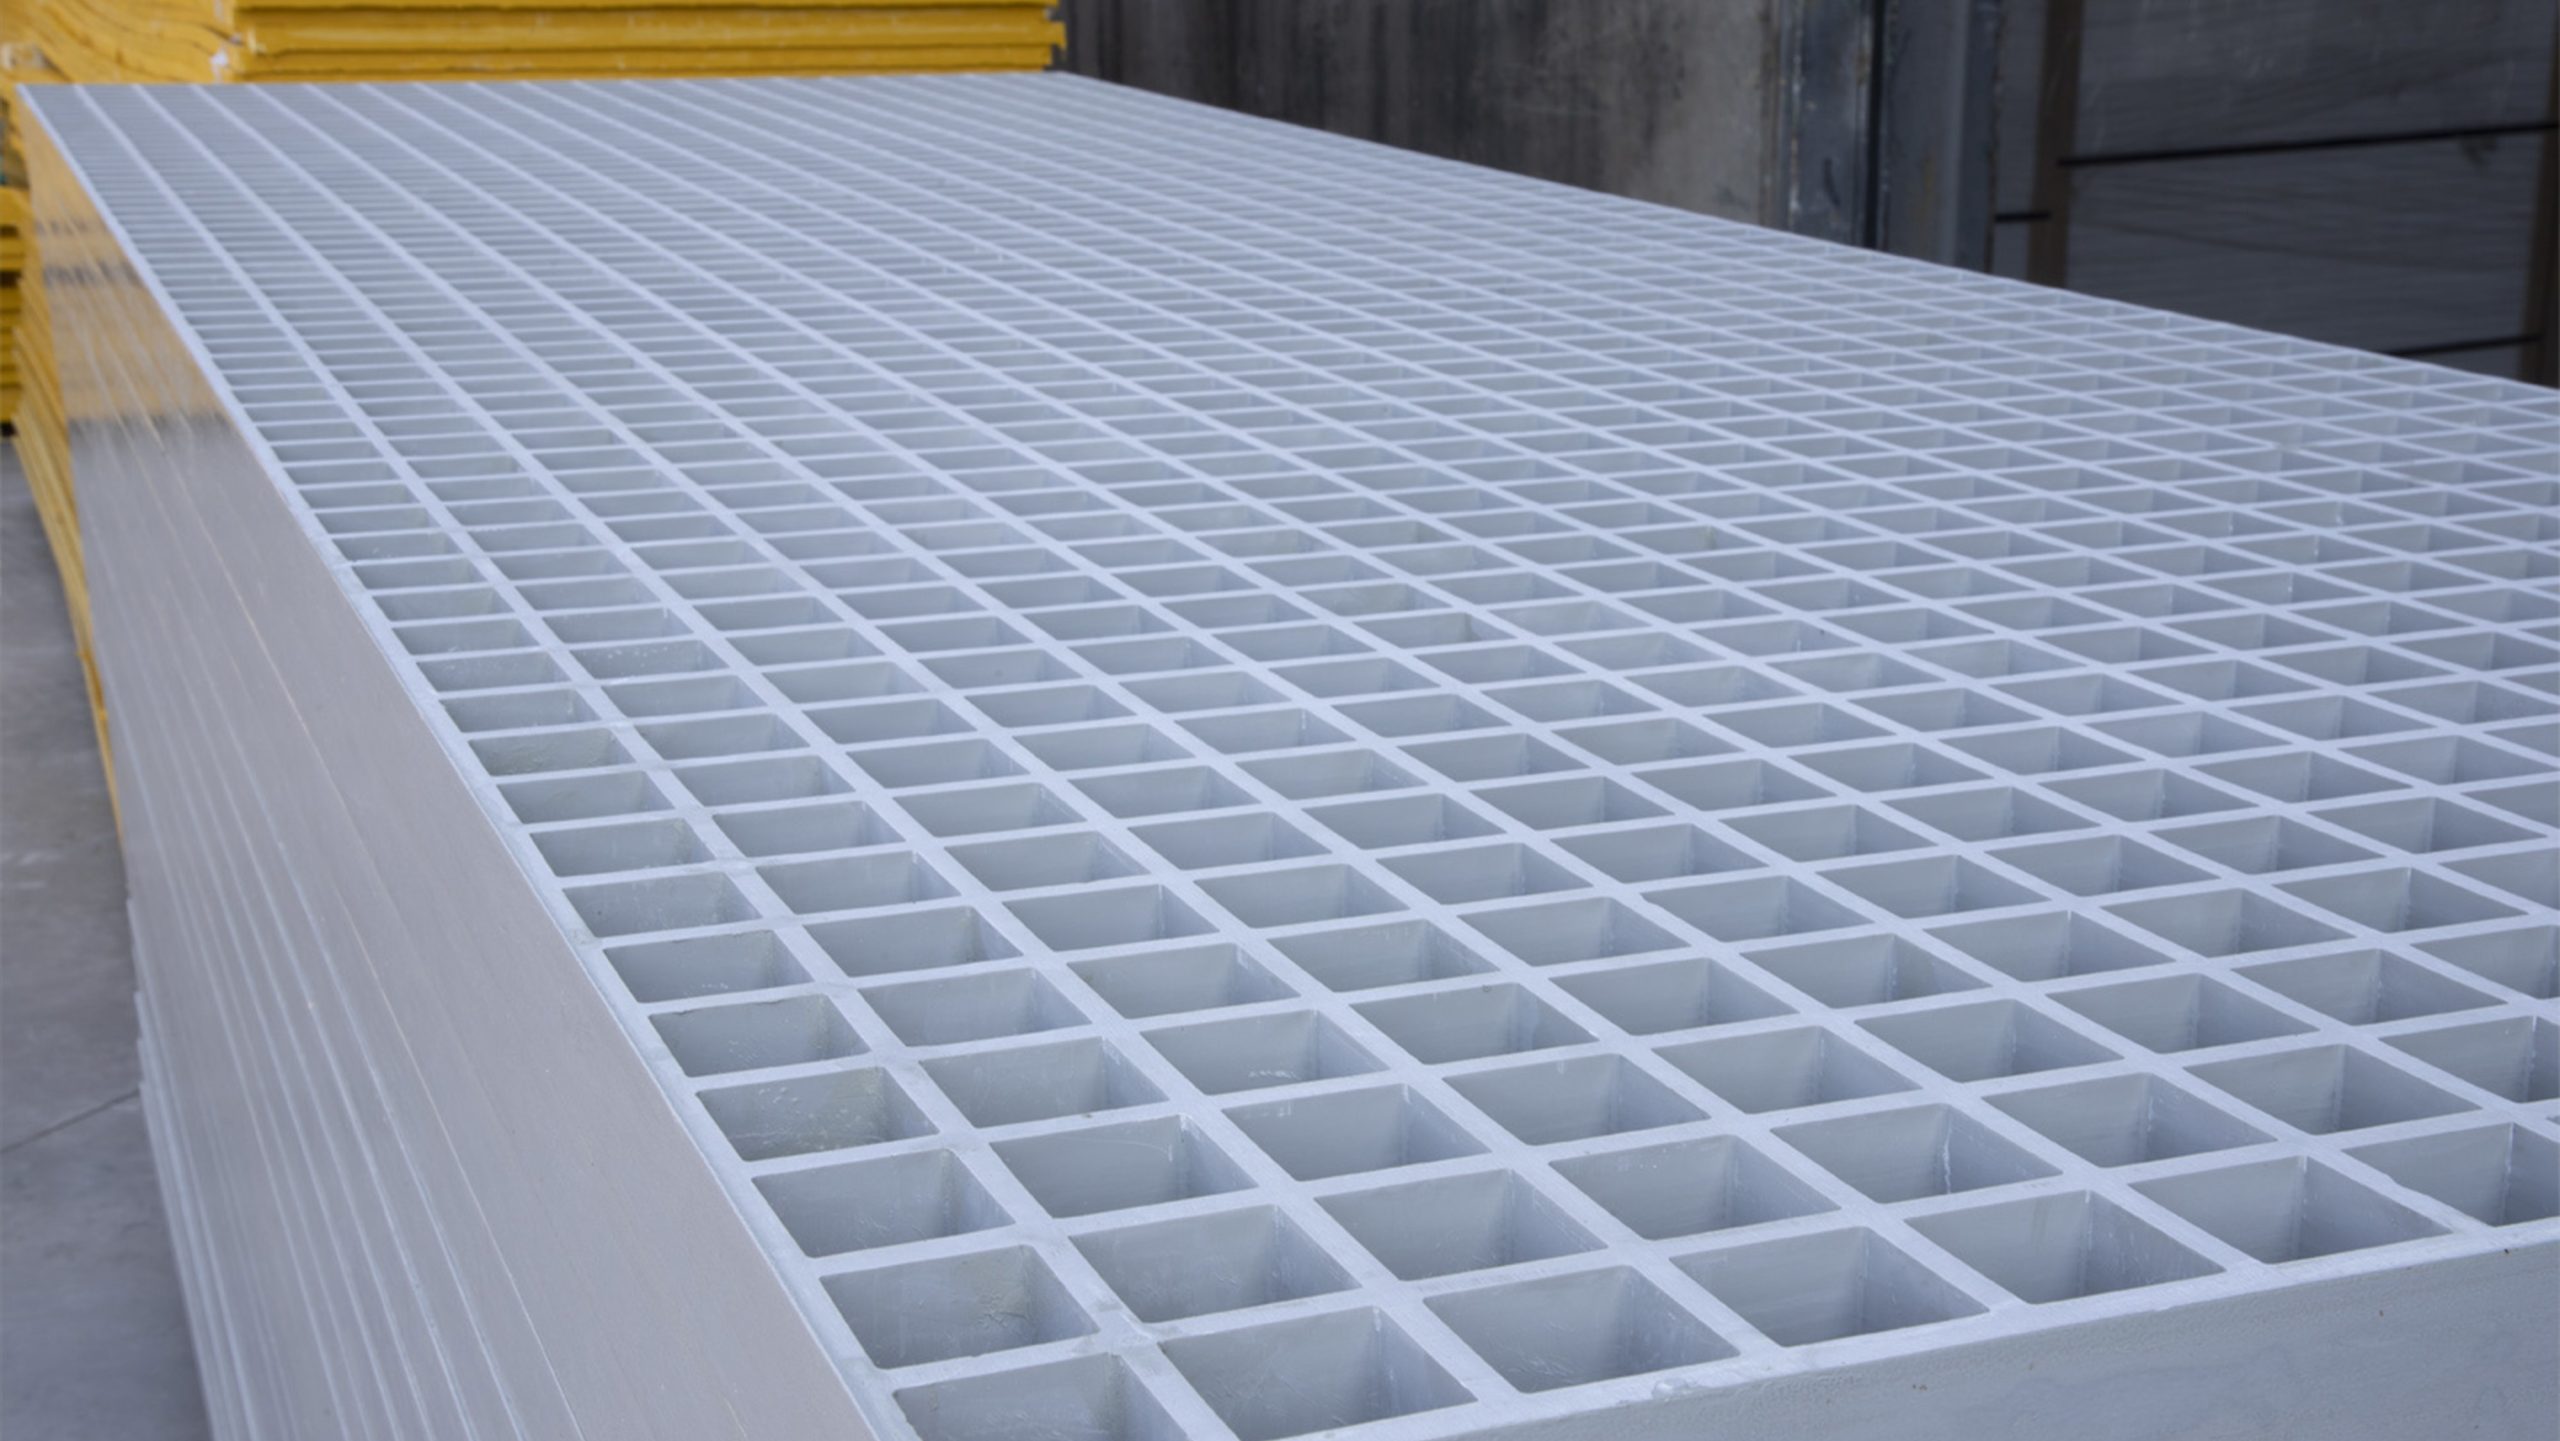 Application Of FRP Grating For Walkway In PV Industry